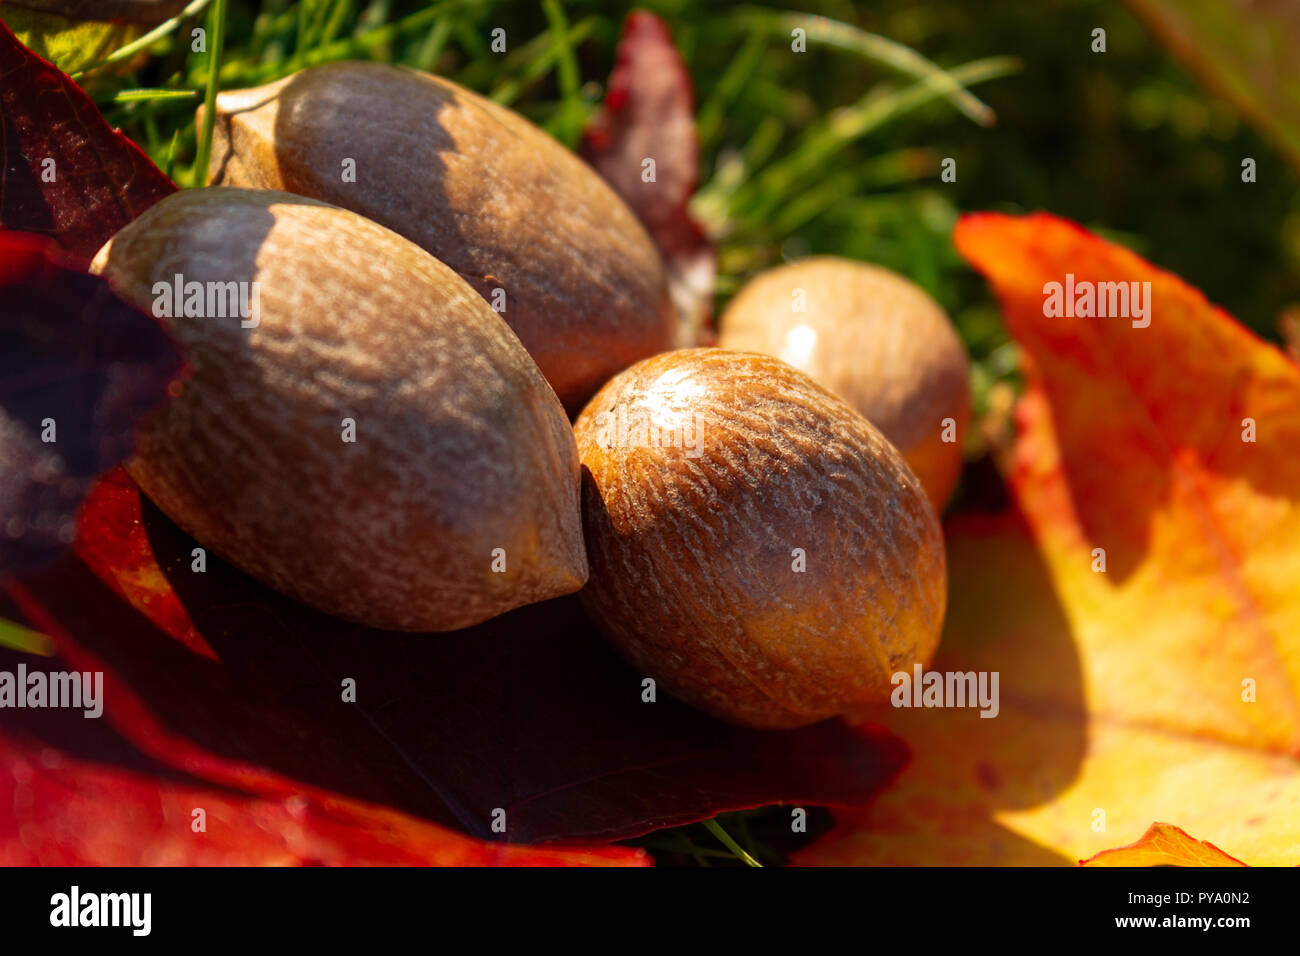 Autumnal still life image of pecan nuts sitting on some yellow and red maple leaves. Stock Photo